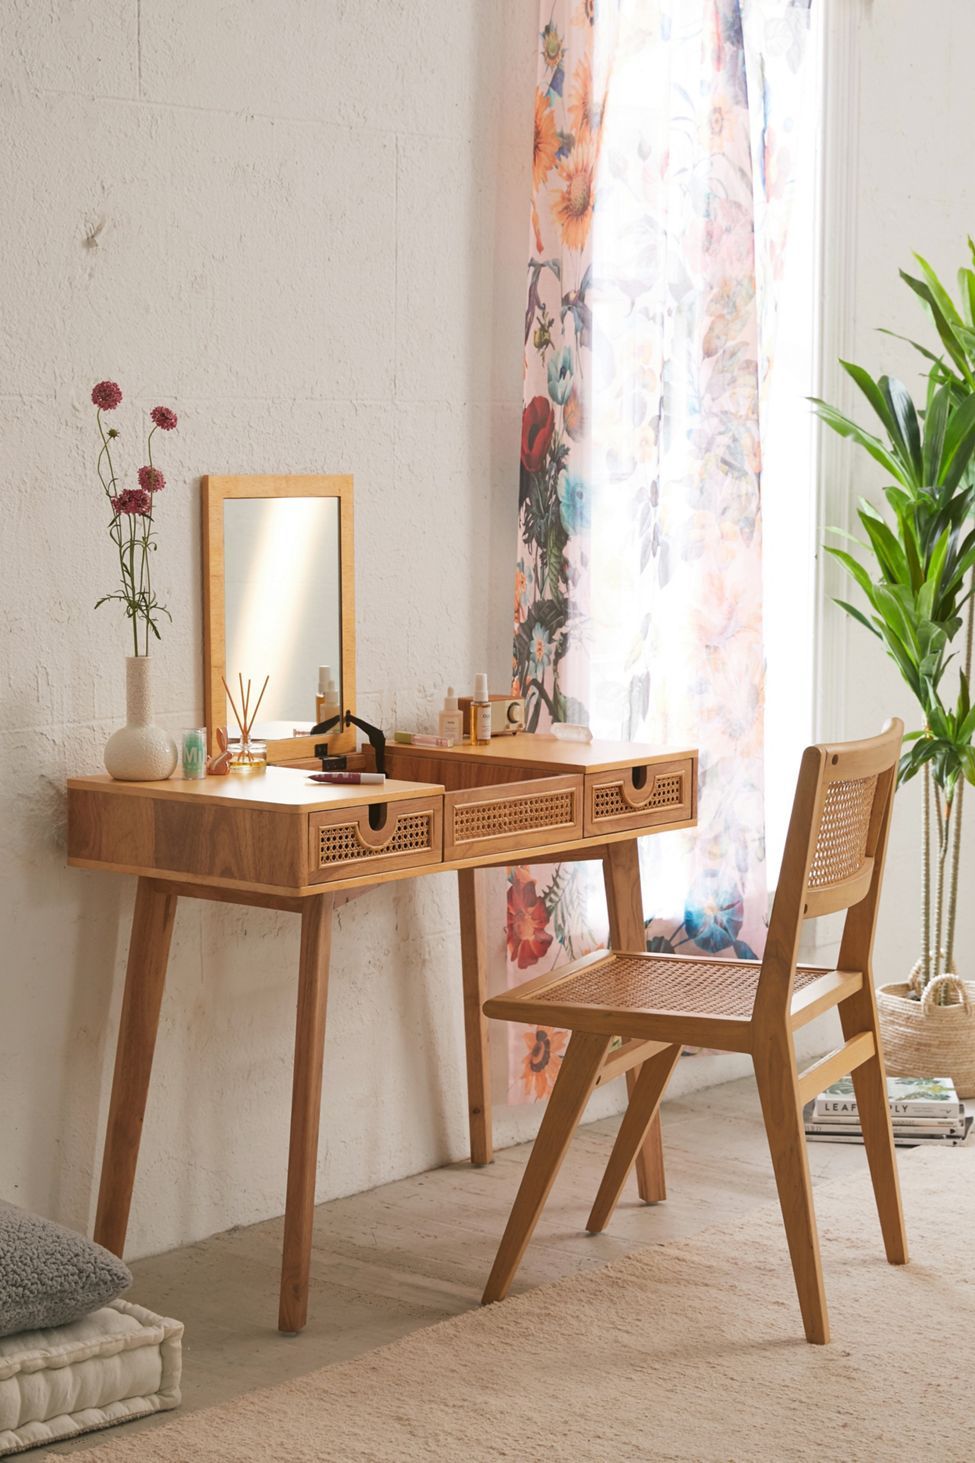 15 Best Makeup Vanity Tables 2019 The, Best Vanity Table With Lights